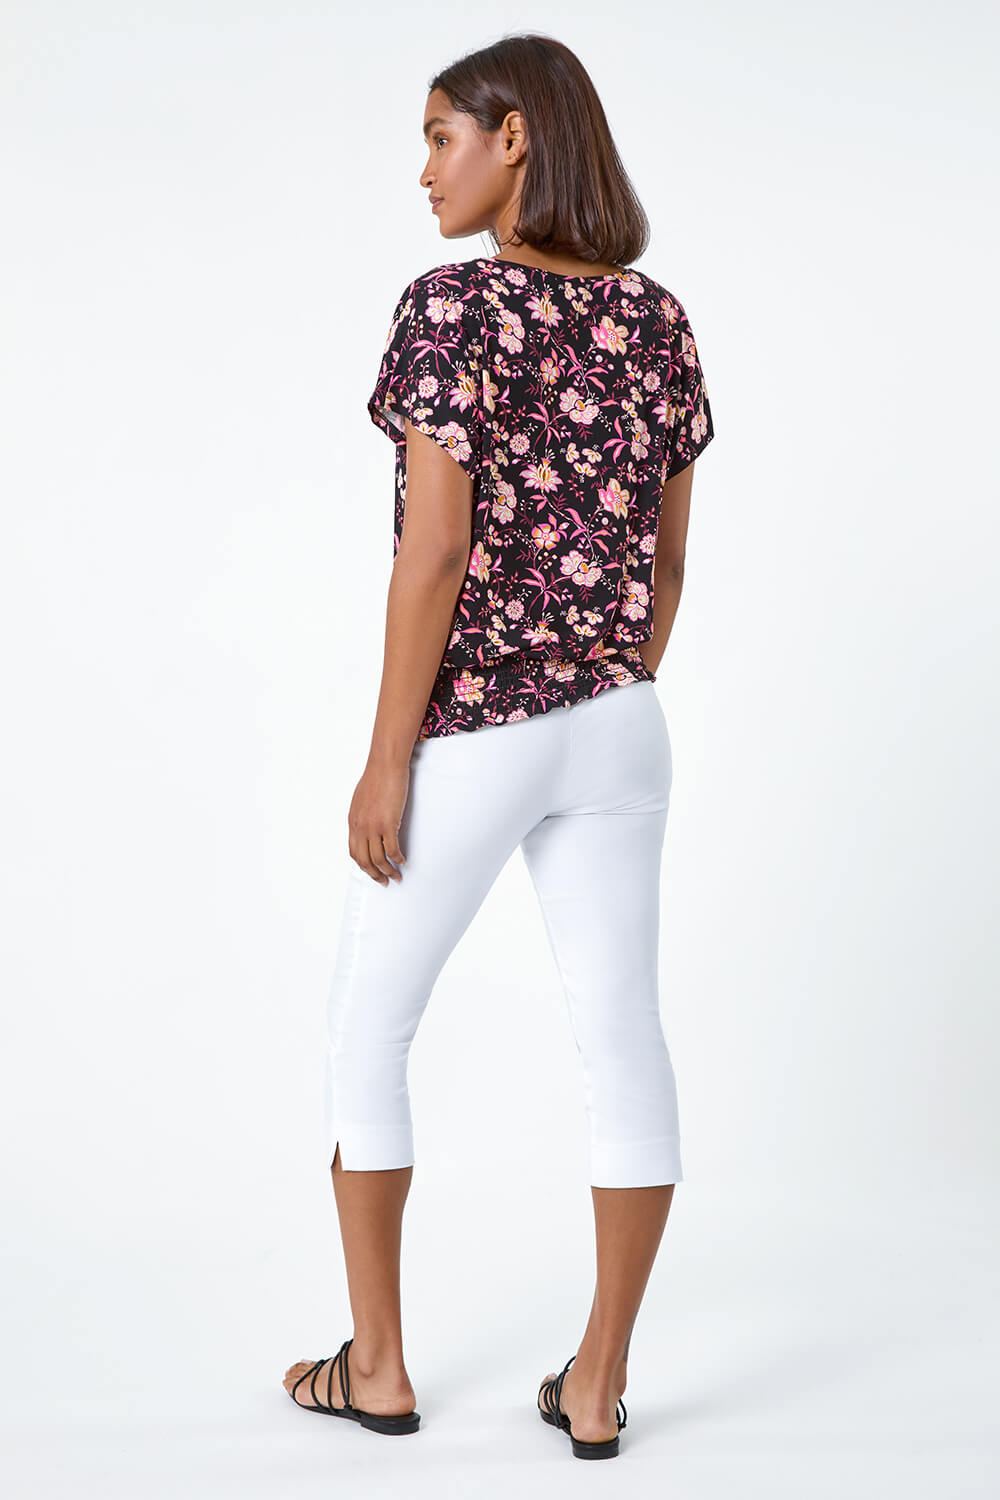 PINK Floral Shirred Stretch Waist T-Shirt, Image 3 of 5